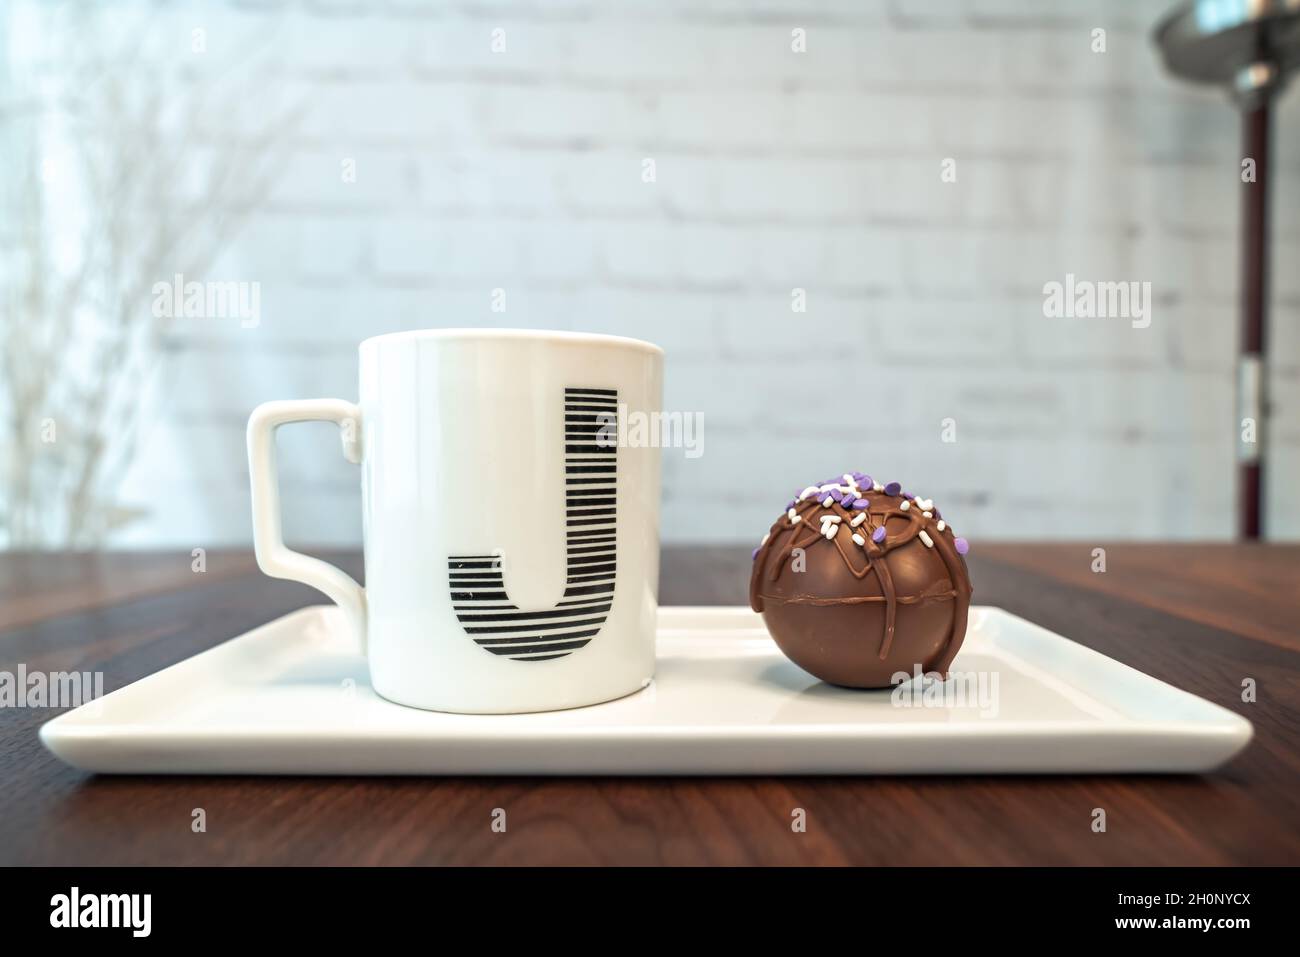 Side view of a hot cocoa or chocolate bomb covered in drizzled brown chocolate and purple and white sprinkles and letter J monogram coffee mug on plat Stock Photo